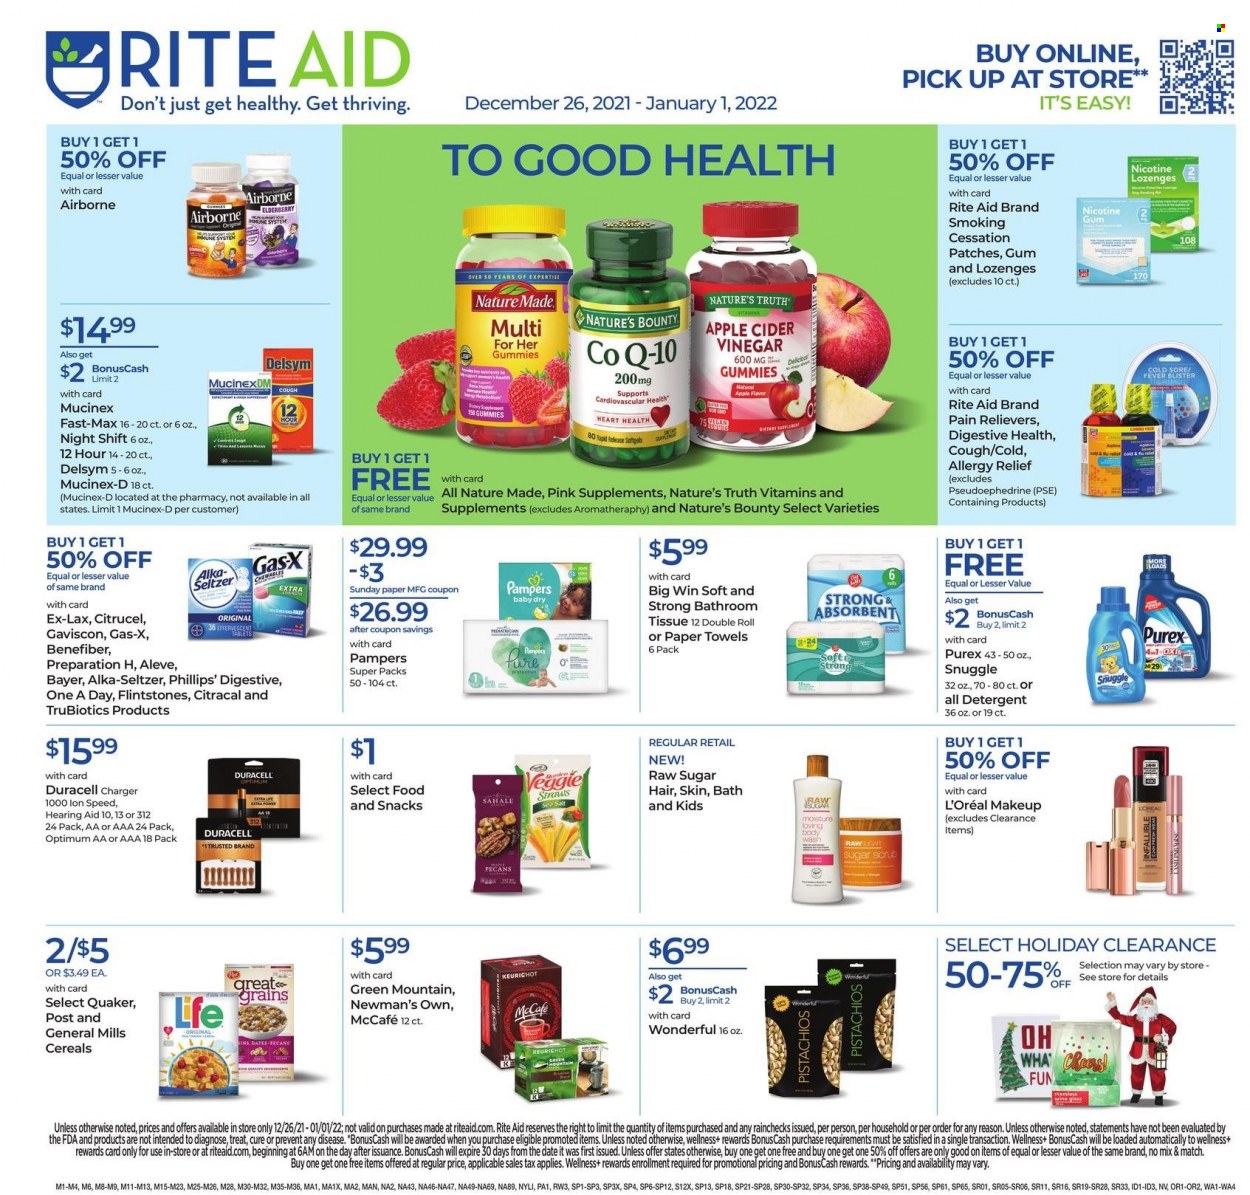 thumbnail - RITE AID Flyer - 12/26/2021 - 01/01/2022 - Sales products - Quaker, cereals, apple cider vinegar, vinegar, pecans, pistachios, McCafe, Green Mountain, Pampers, bath tissue, kitchen towels, paper towels, detergent, Snuggle, Purex, body wash, Raw Sugar, L’Oréal, makeup, wine glass, battery charger, Duracell, Optimum, Aleve, Delsym, Mucinex, Nature Made, Nature's Bounty, Nature's Truth, nicotine therapy, Alka-seltzer, Gaviscon, Bayer, allergy relief. Page 1.